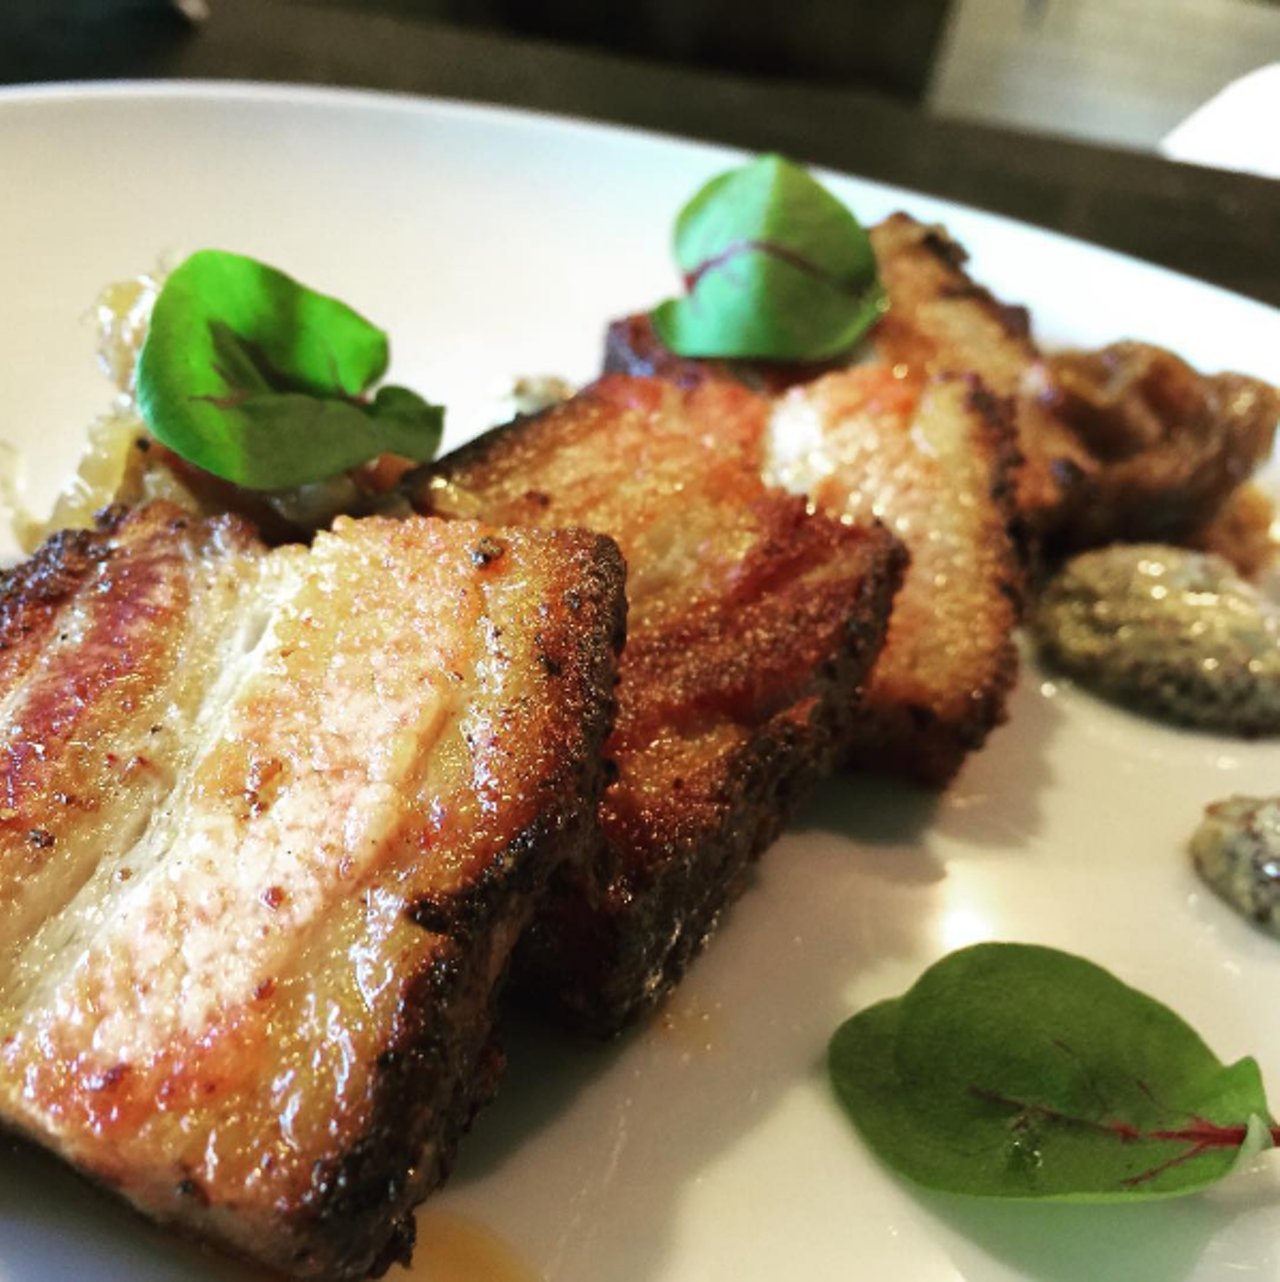  Heritage Pork Belly at Spencers for Steaks and Chops
Start off with this app that features two trends: heritage hogs and pork belly. It&#146;s a sweet/savory combo of Gala apple, huckleberry, pecans and apple chips. 
6001 Destination Pkwy., 407-313-4300
Photo via spencersforsteaksandchops/Instagram